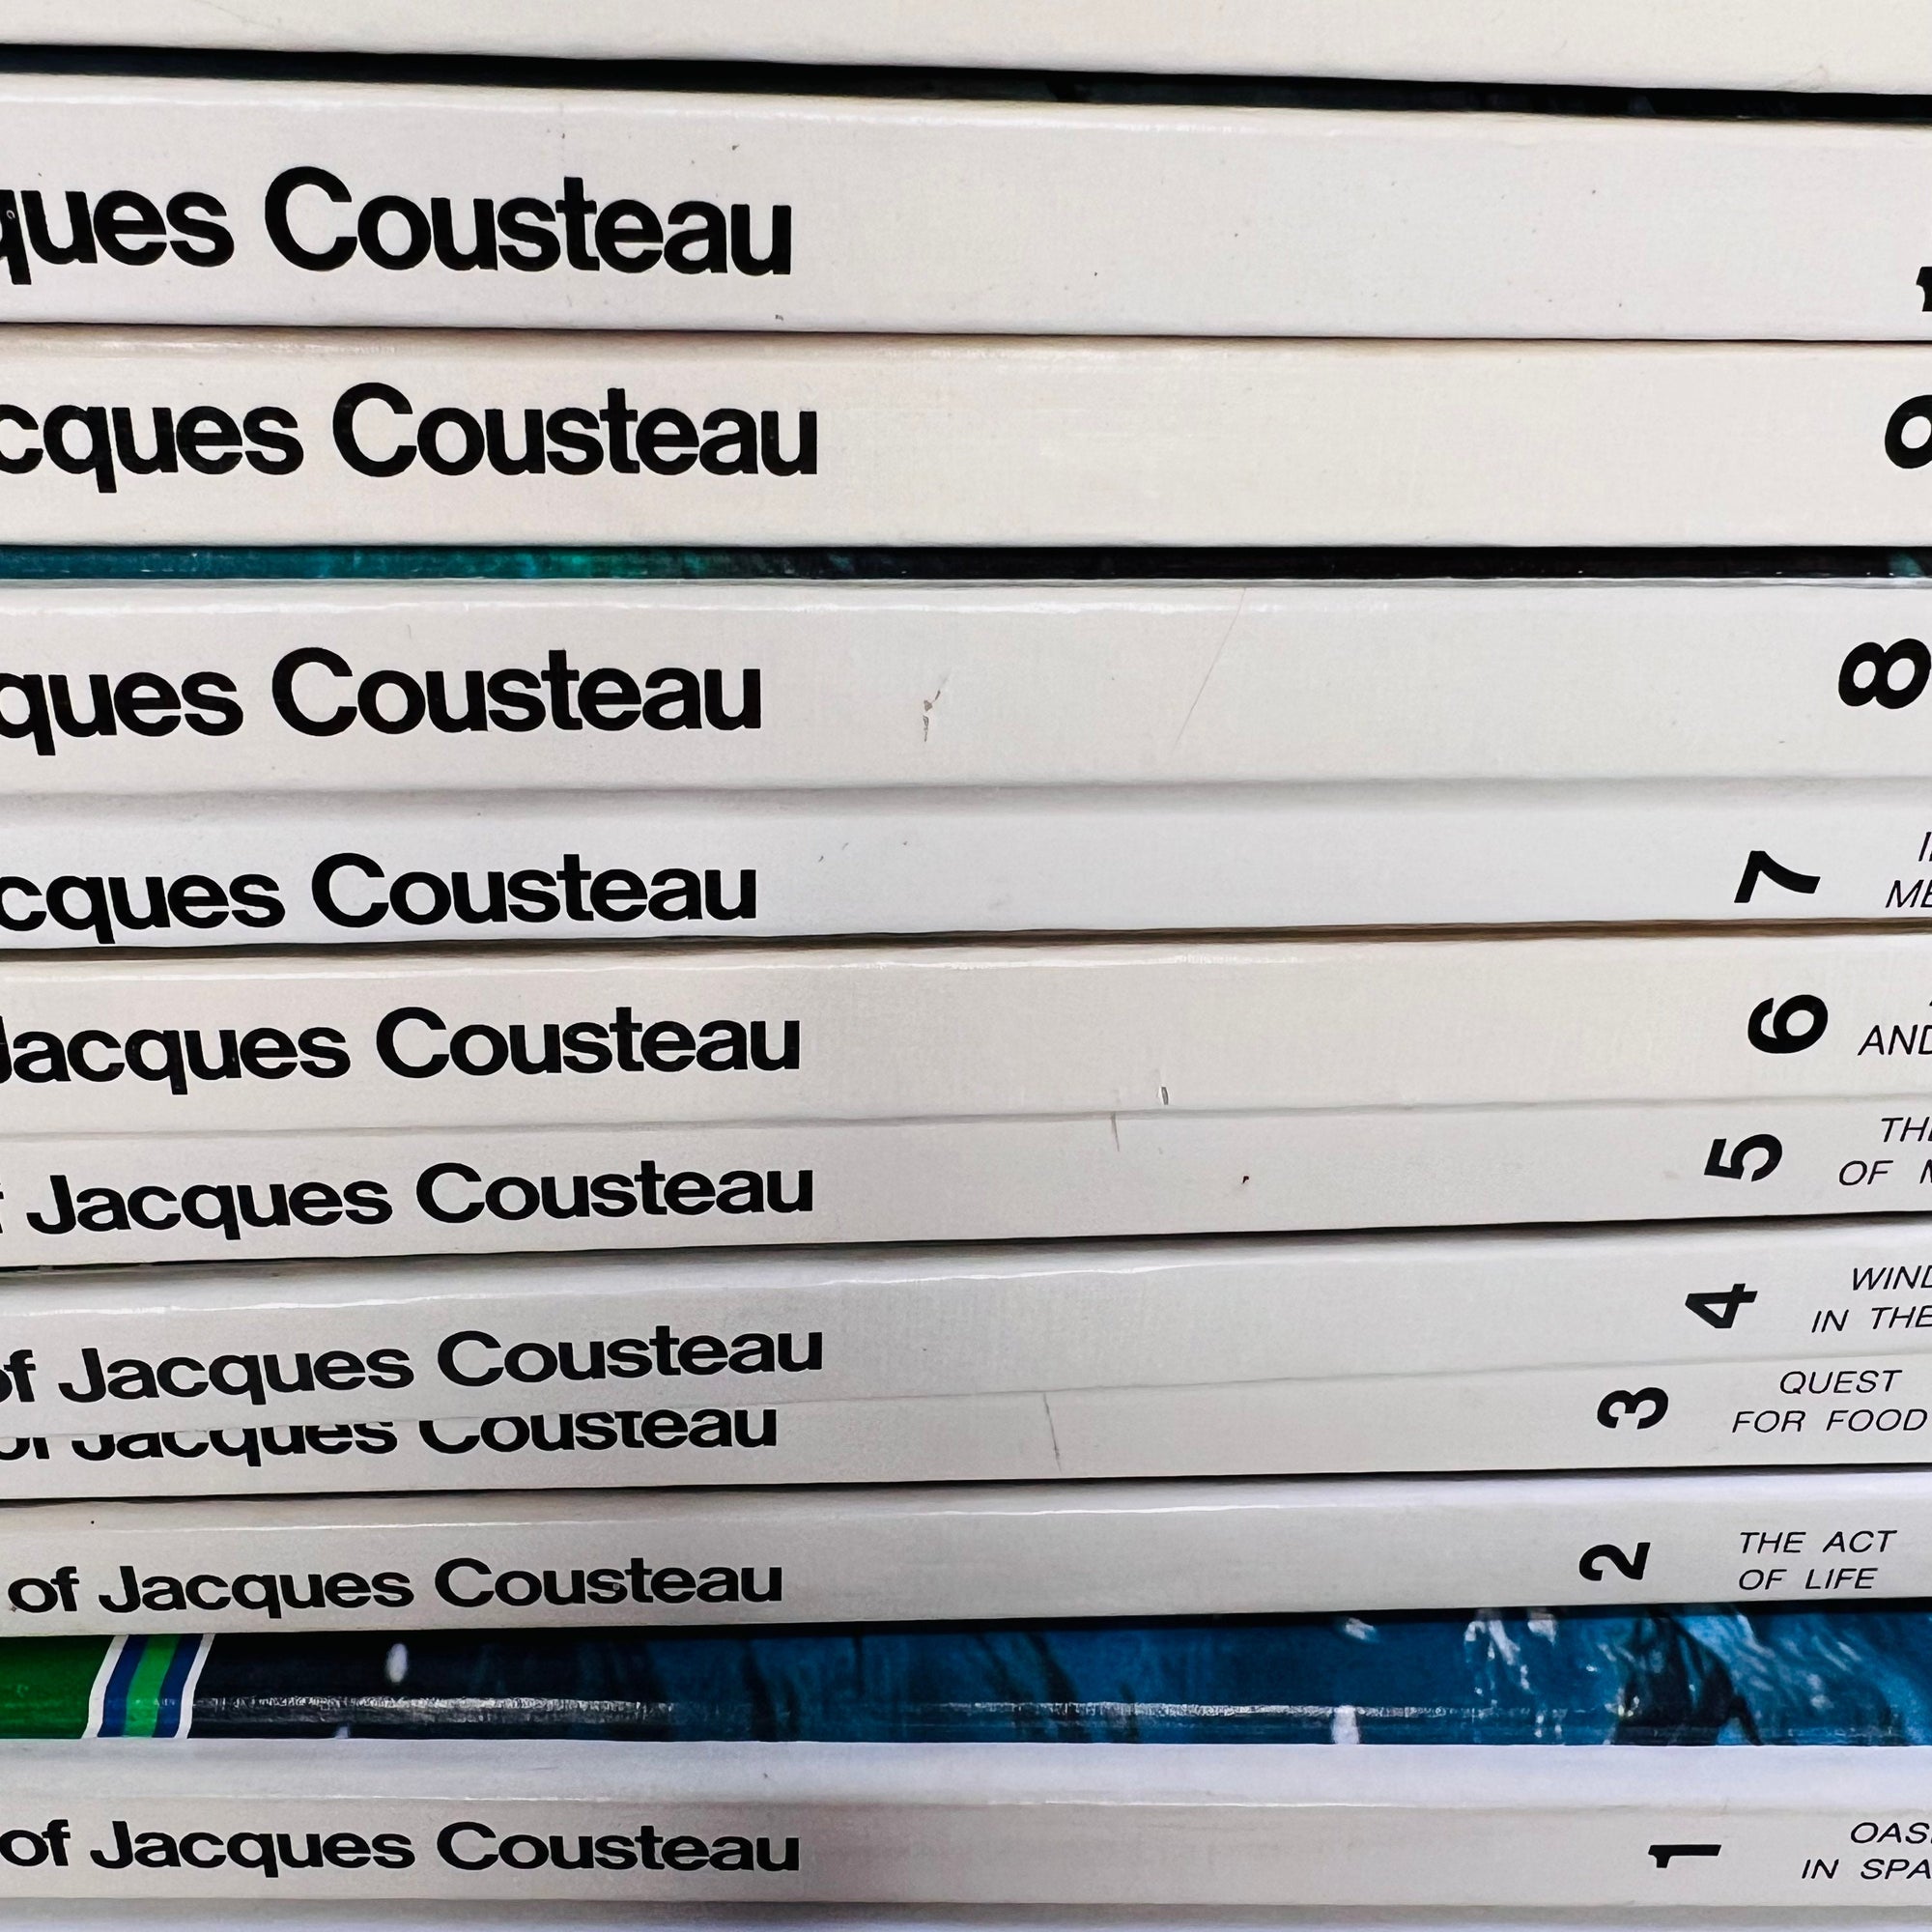 The Ocean World of Jacques Cousteau 20 Hardcover Book Set 1973 First Printing The Danbury Press Vintage Books by Famous Explorer Ecologist